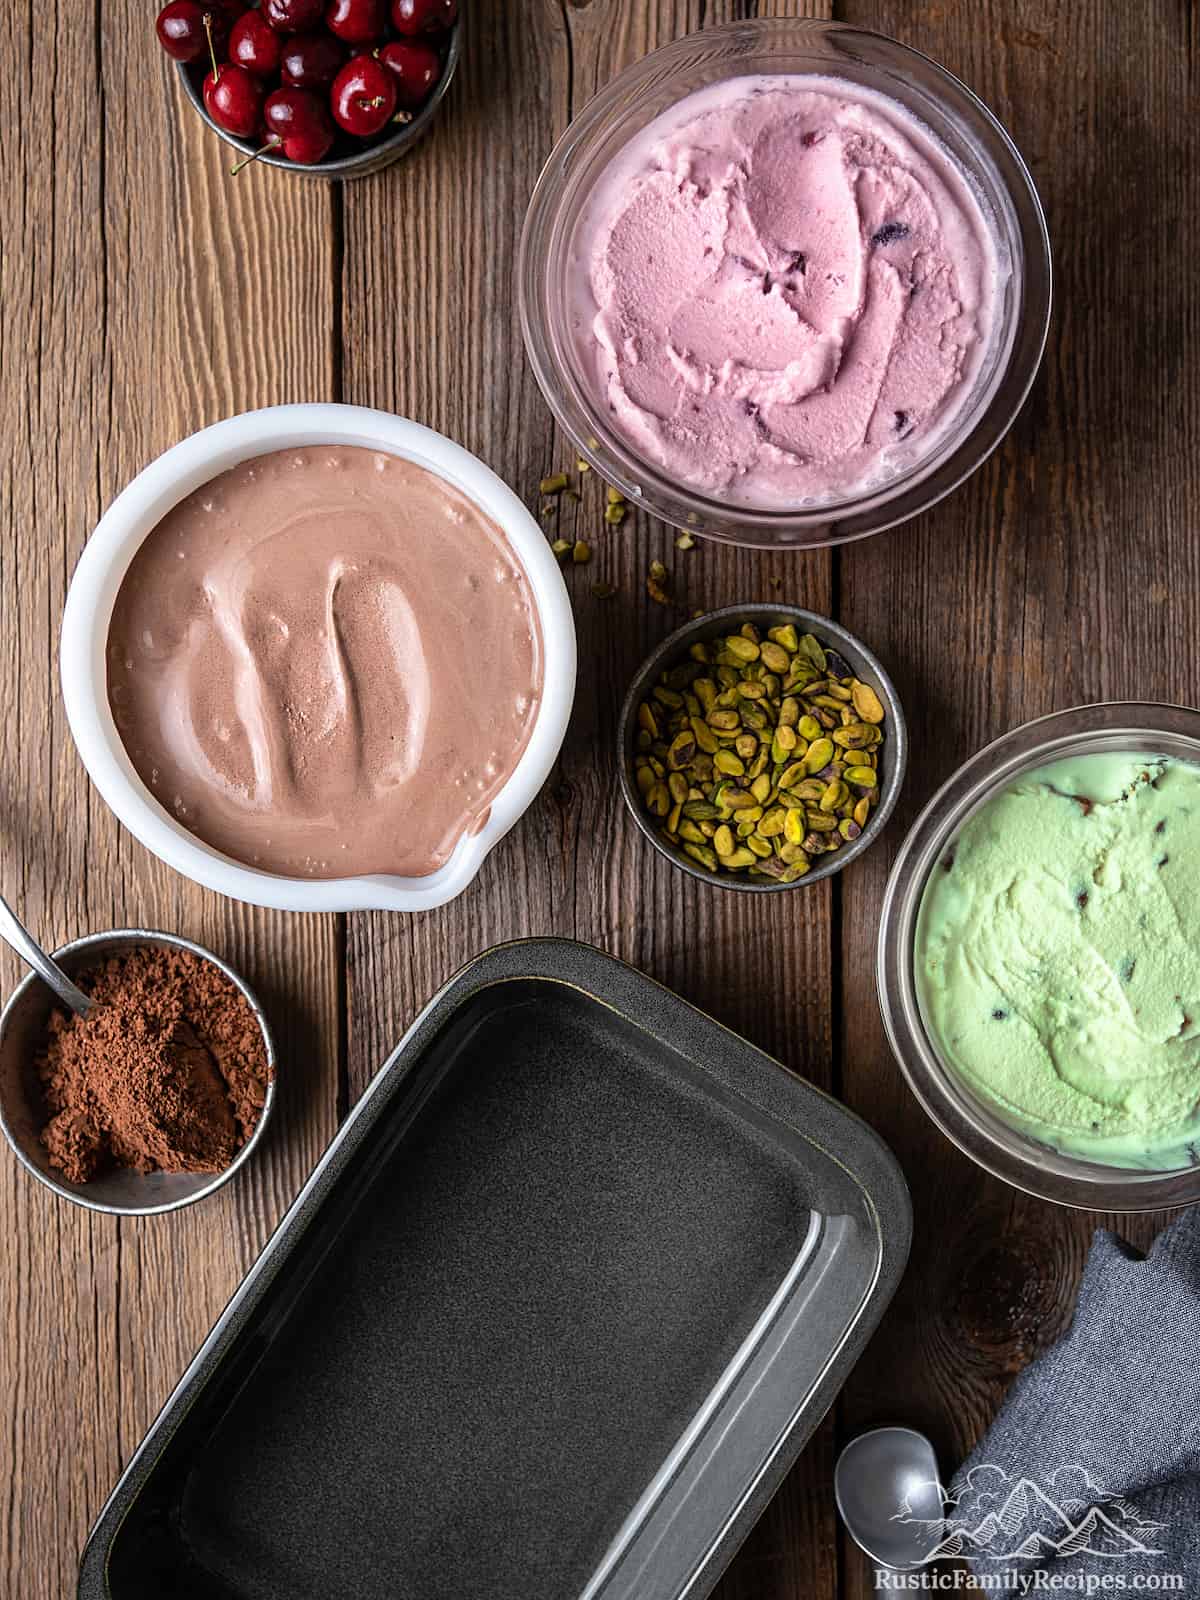 Bowls of chocolate ice cream, cherry ice cream, and pistachio ice cream next to their add-ins, and an empty pan.